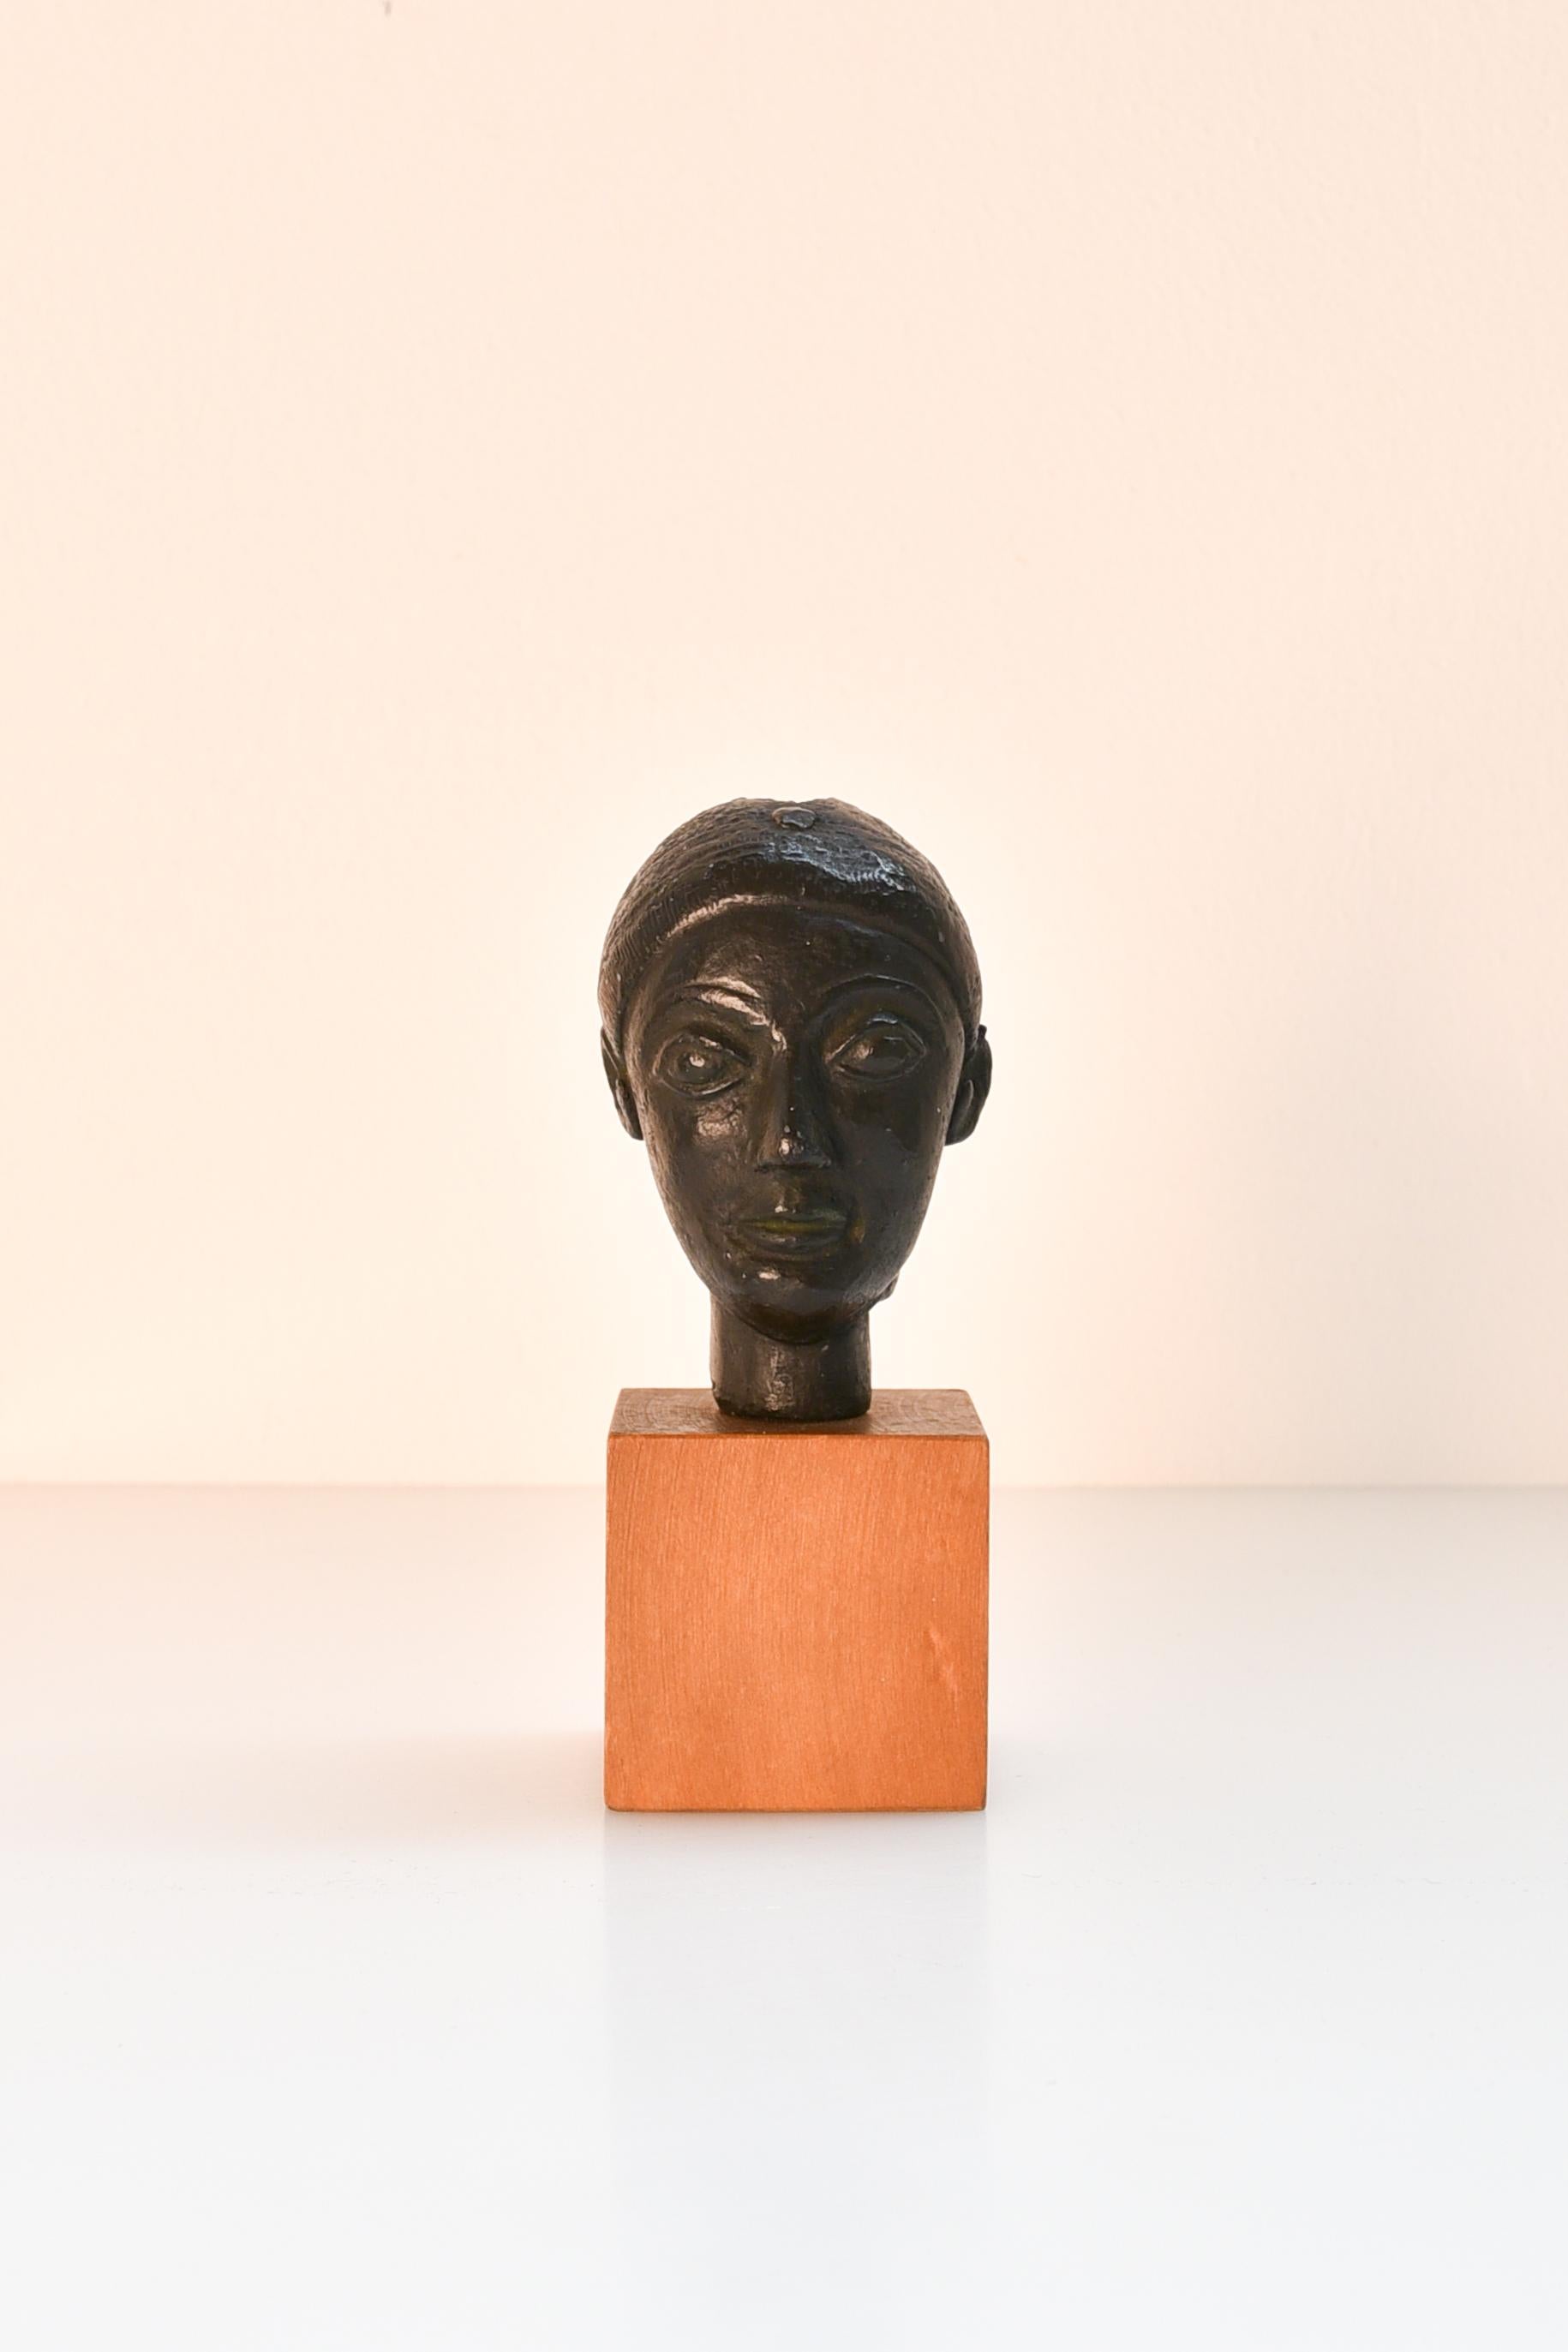 Miniature terracotta head of a woman, mounted on wood  